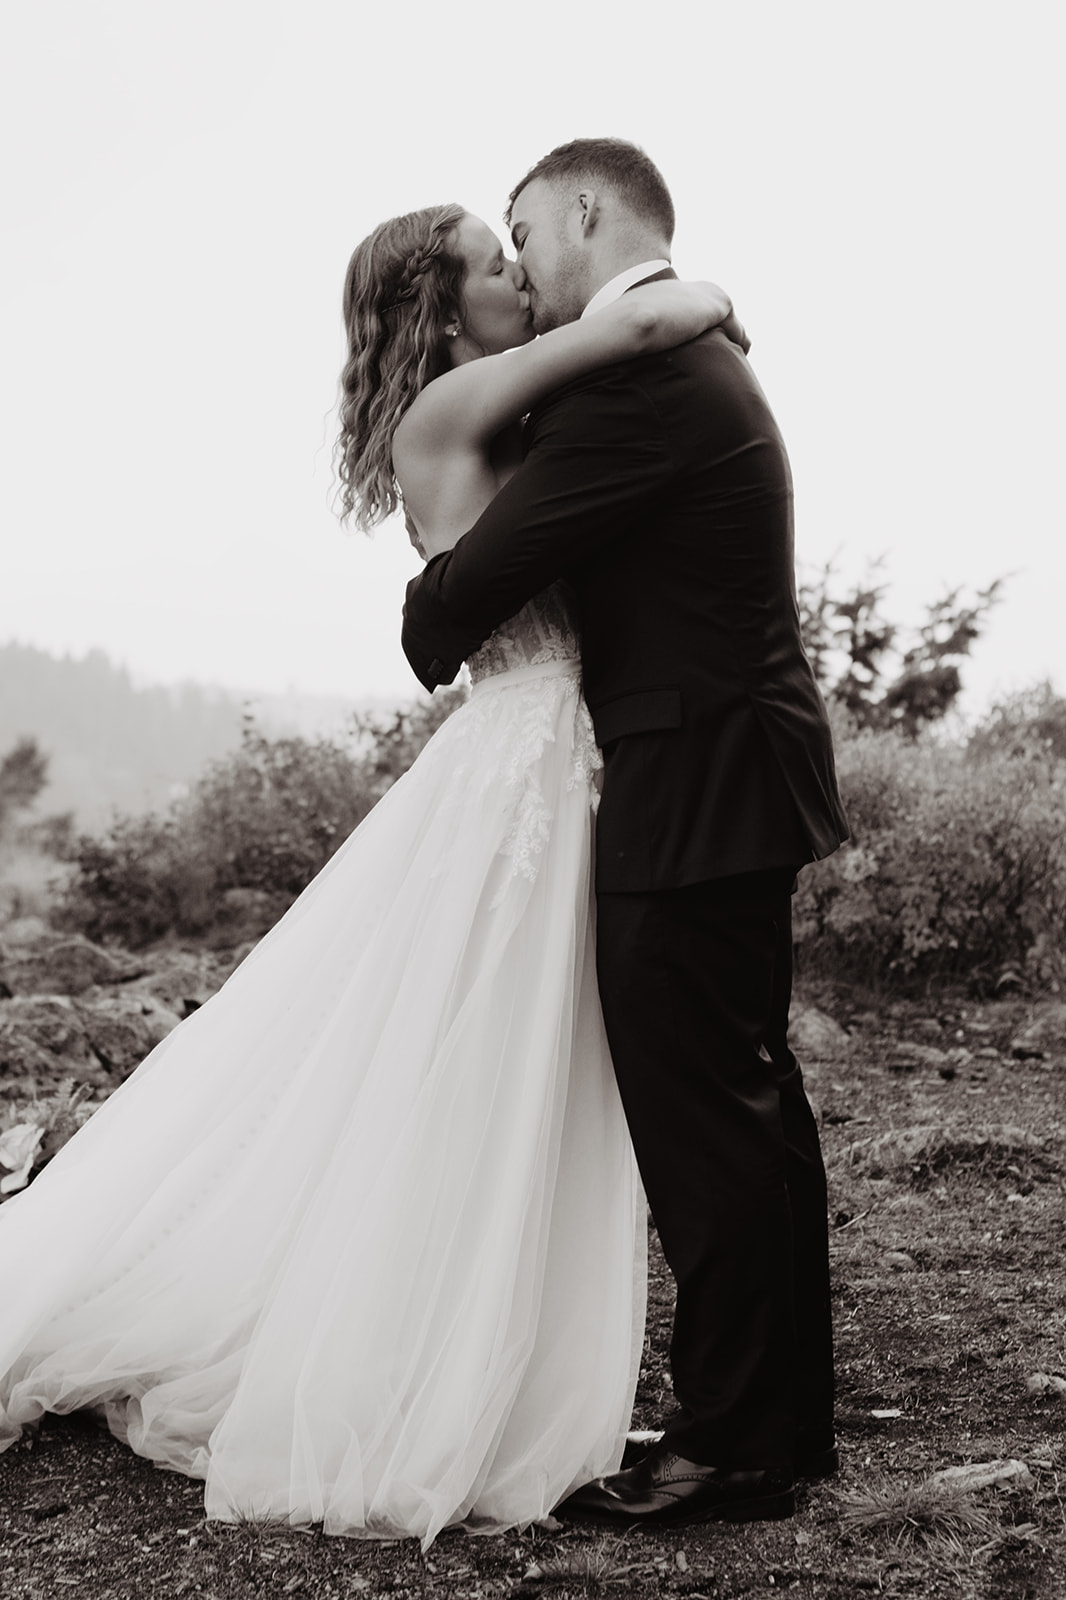 black and white image of couple kissing on their wedding day at Jackson Hole's wedding tree for their ceremony and first kiss as husband and wife